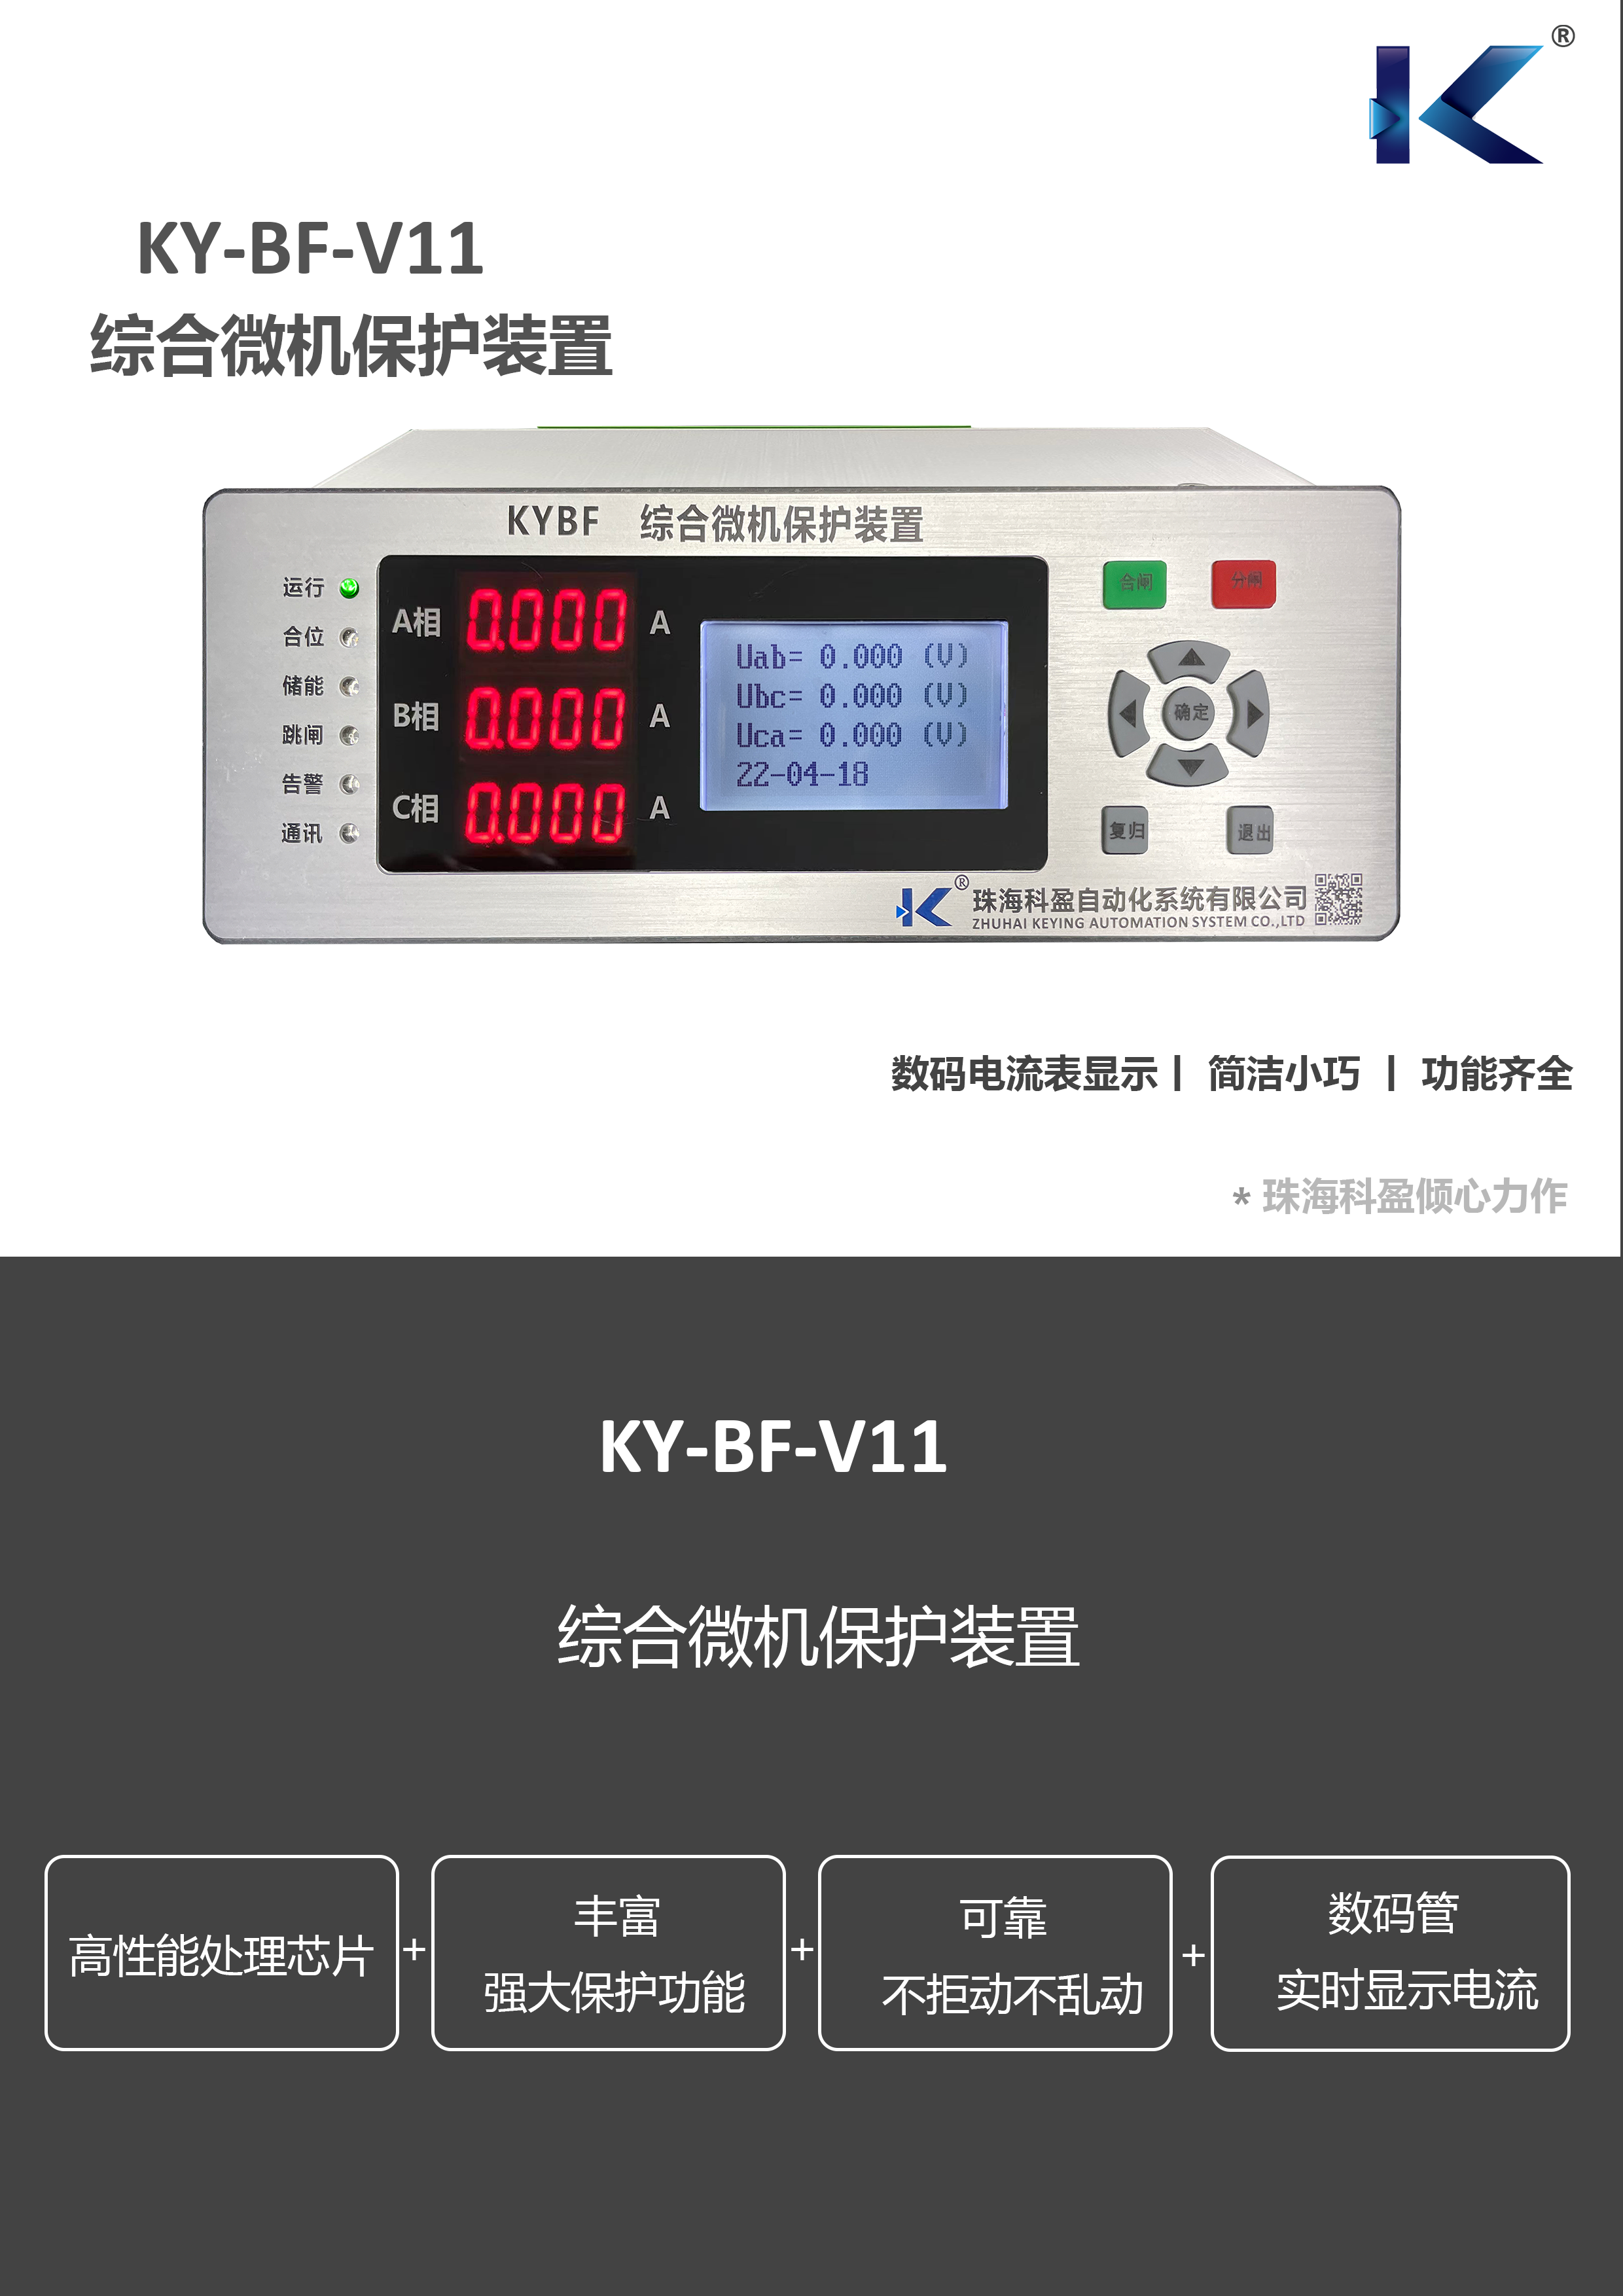 V11产品简介 1.png